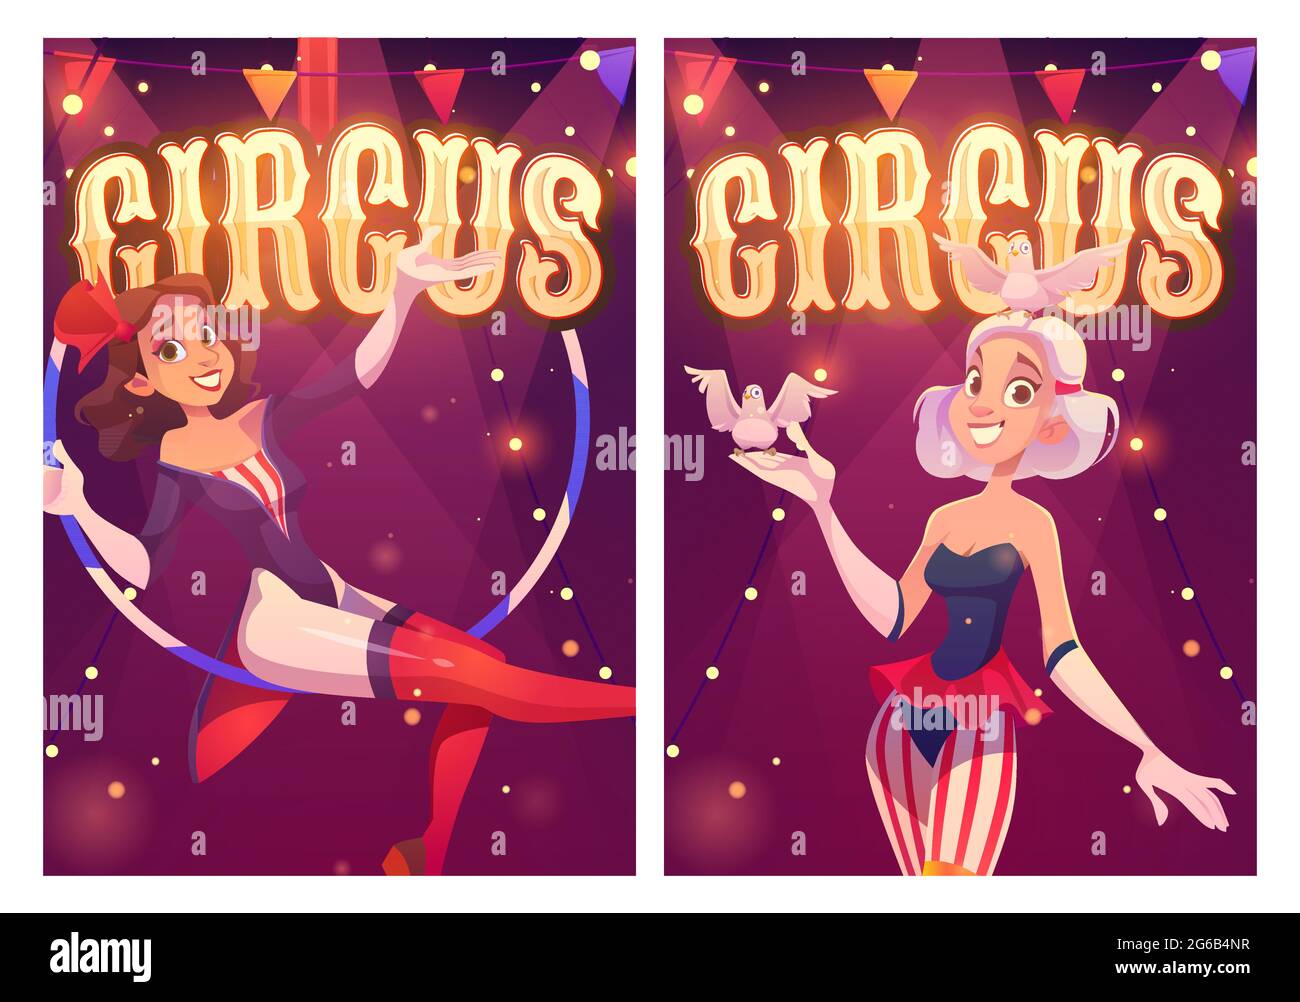 Circus cartoon posters for magic show performance. Big top tent artists  aerial gymnast girl and woman with doves. Carnival entertainment on stage,  Invitation flyers to funfair amusement vector banners Stock Vector Image